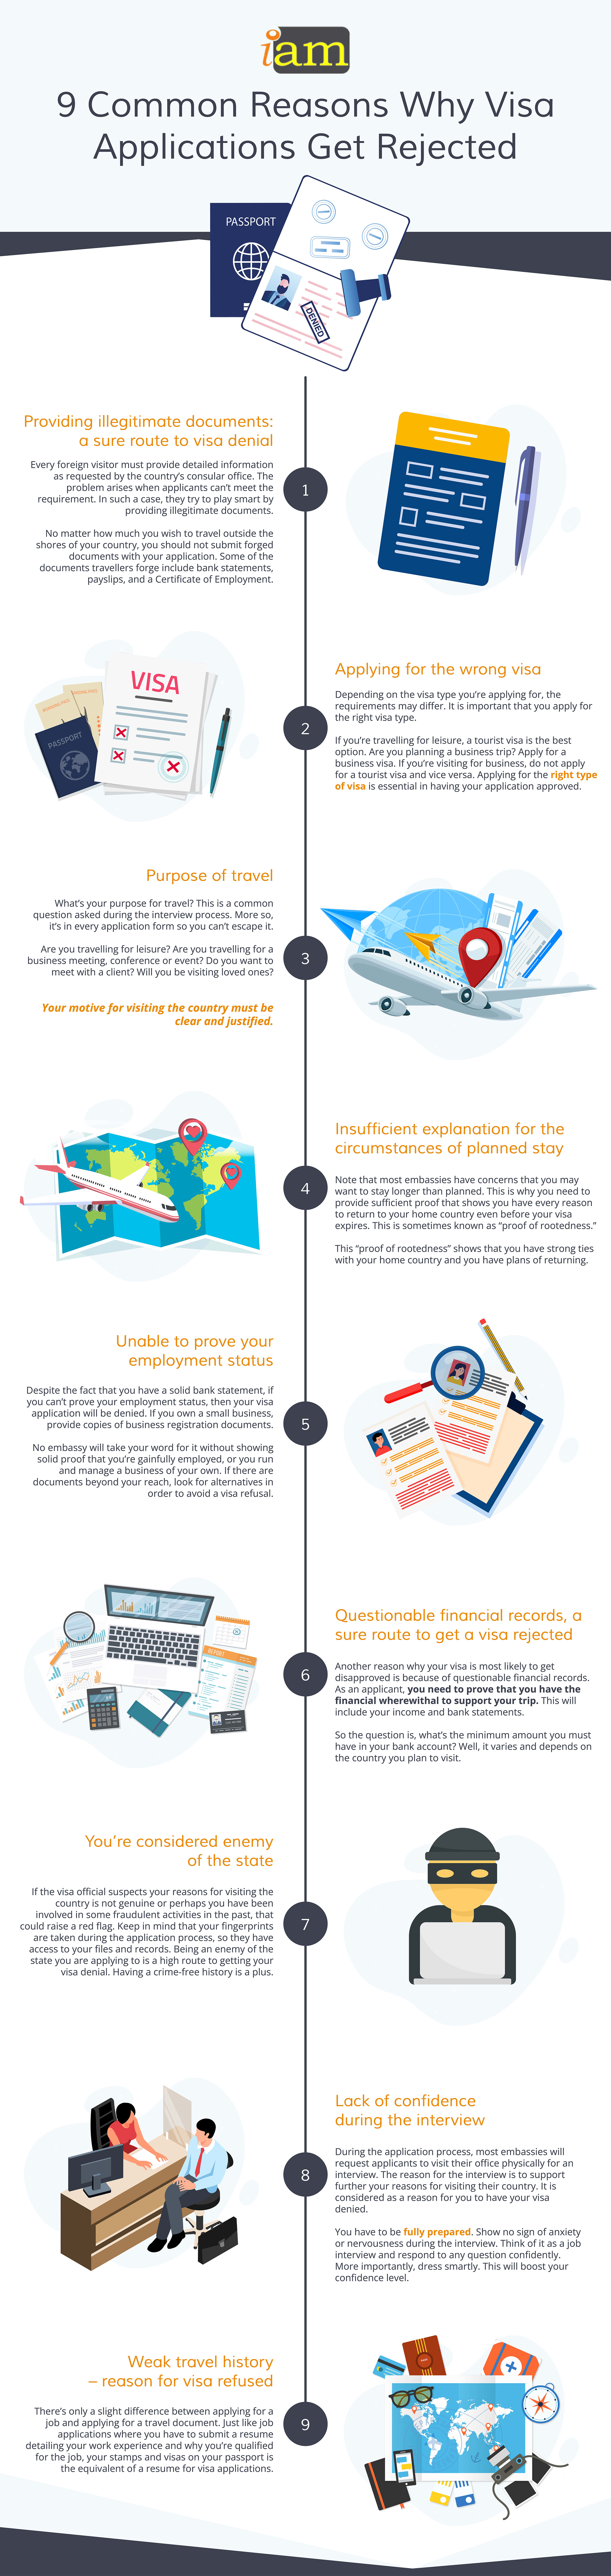 visa rejection reasons infographic